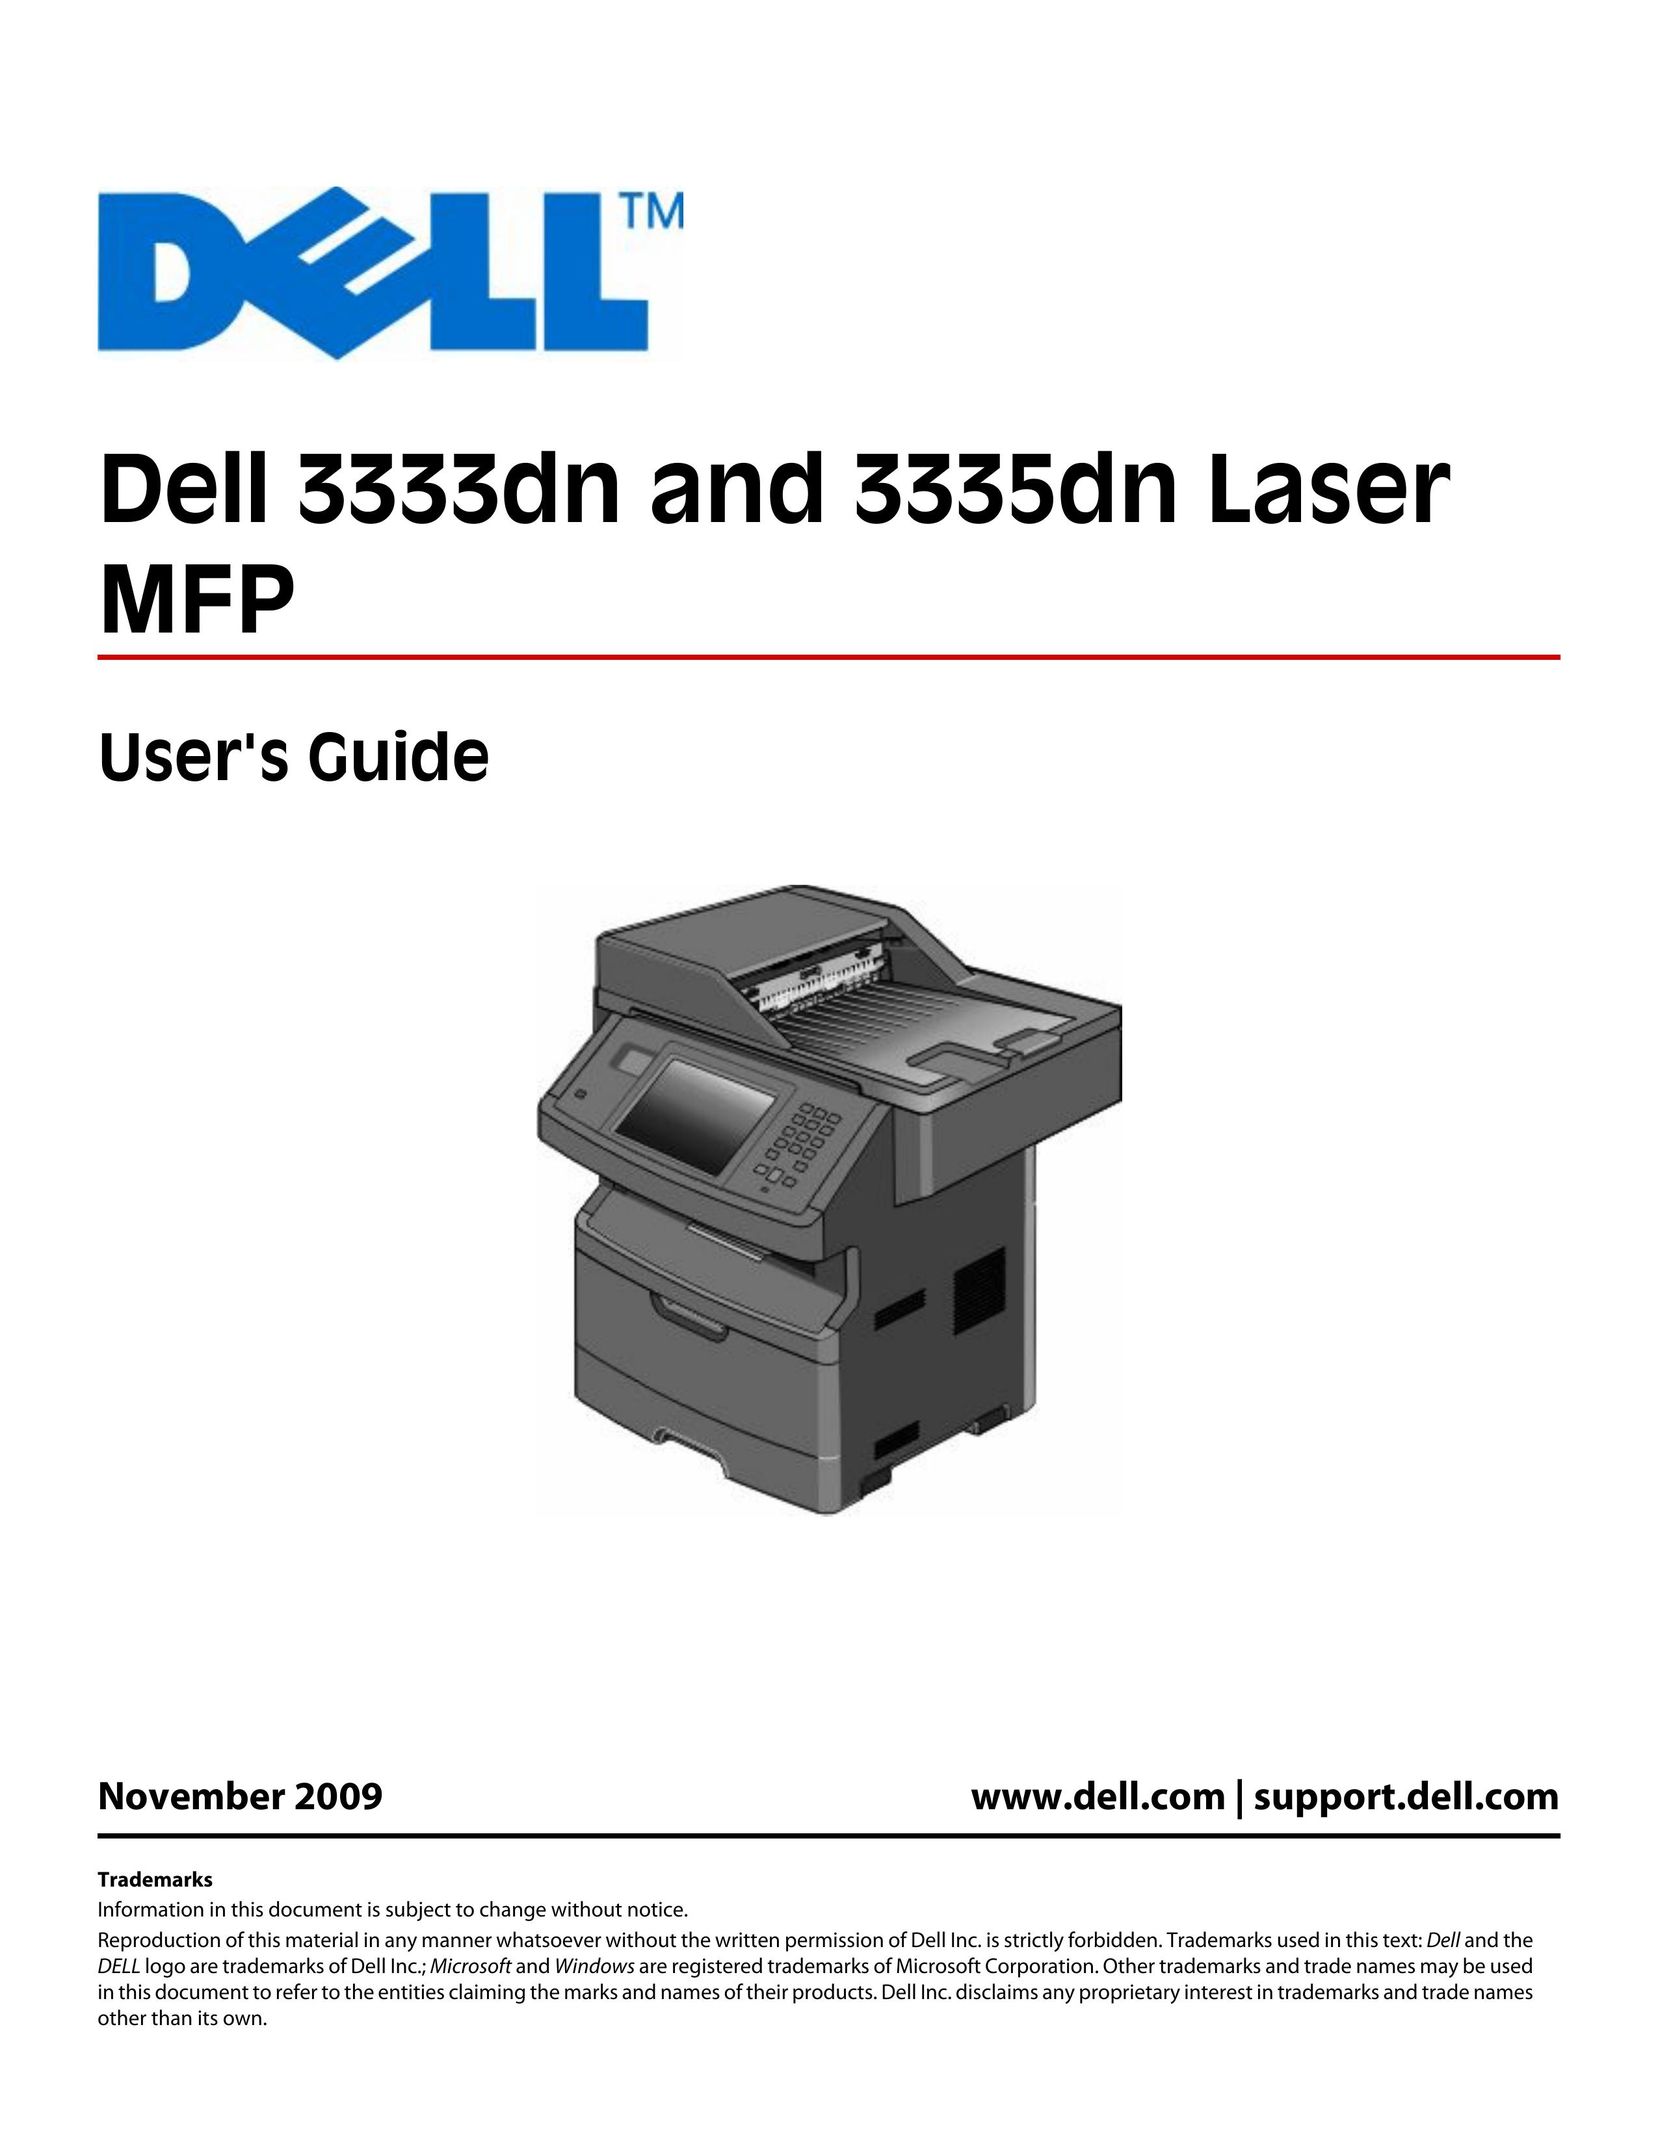 Dell 3333dn All in One Printer User Manual